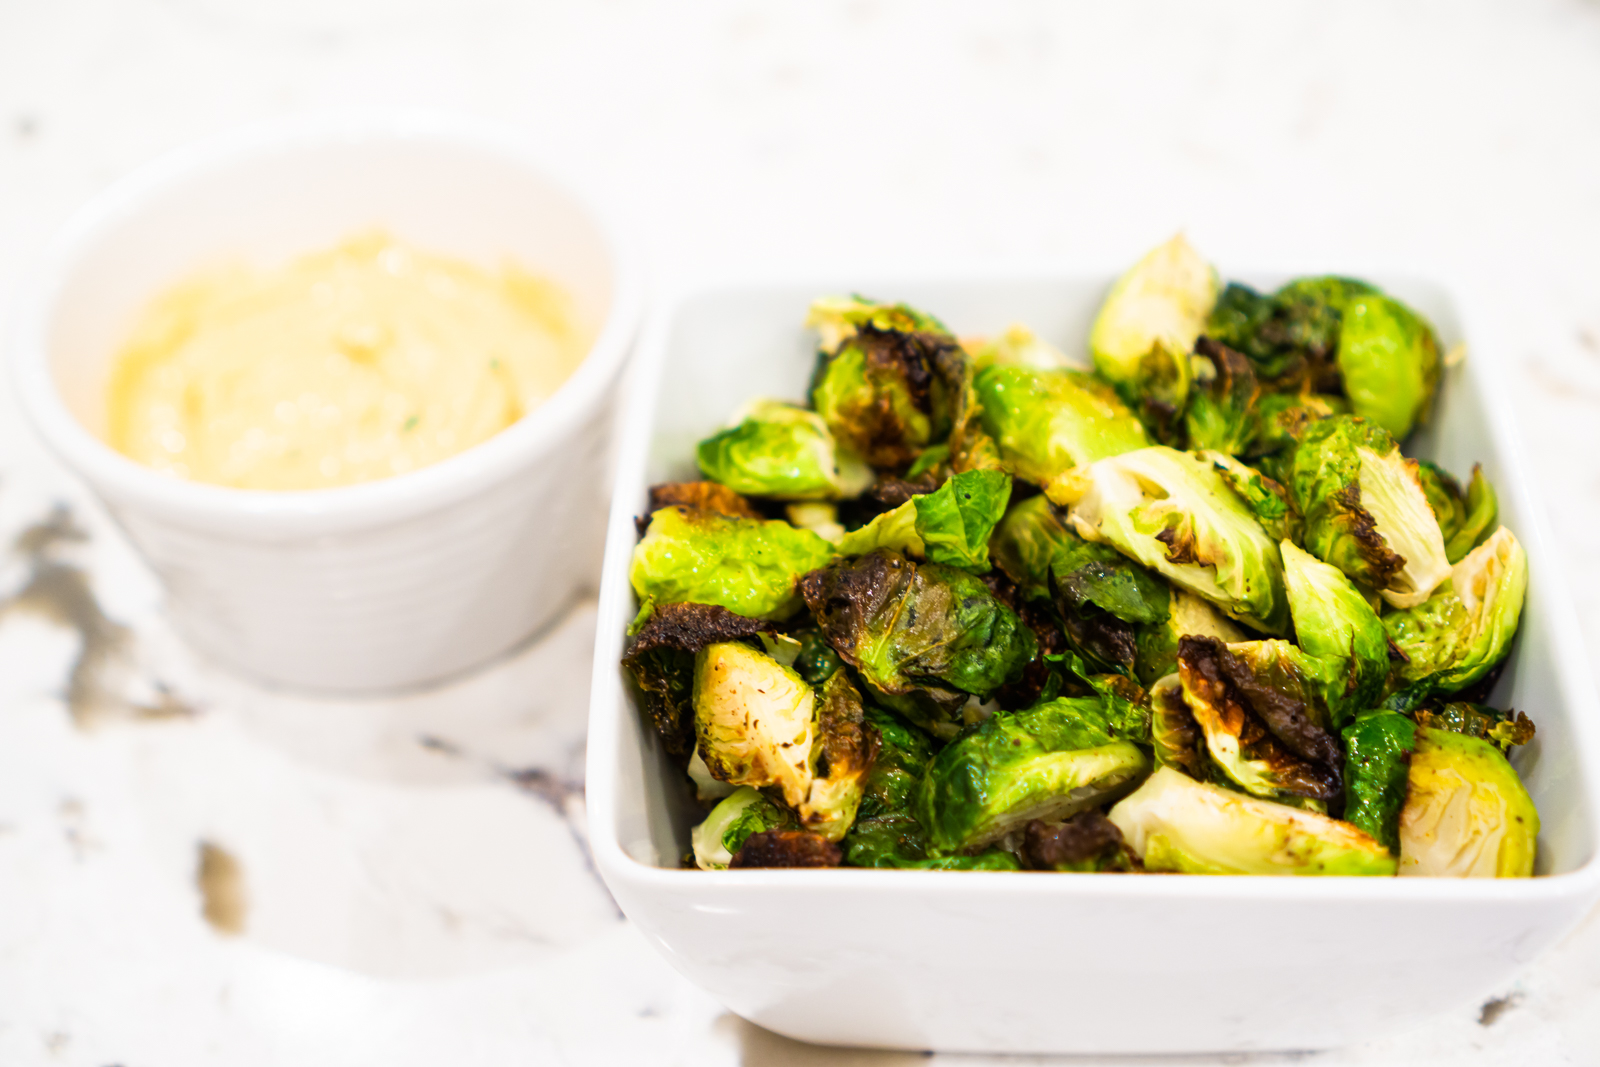 CRISPY BRUSSELS SPROUTS WITH A CHIPOTLE LIME GARLIC AIOLI